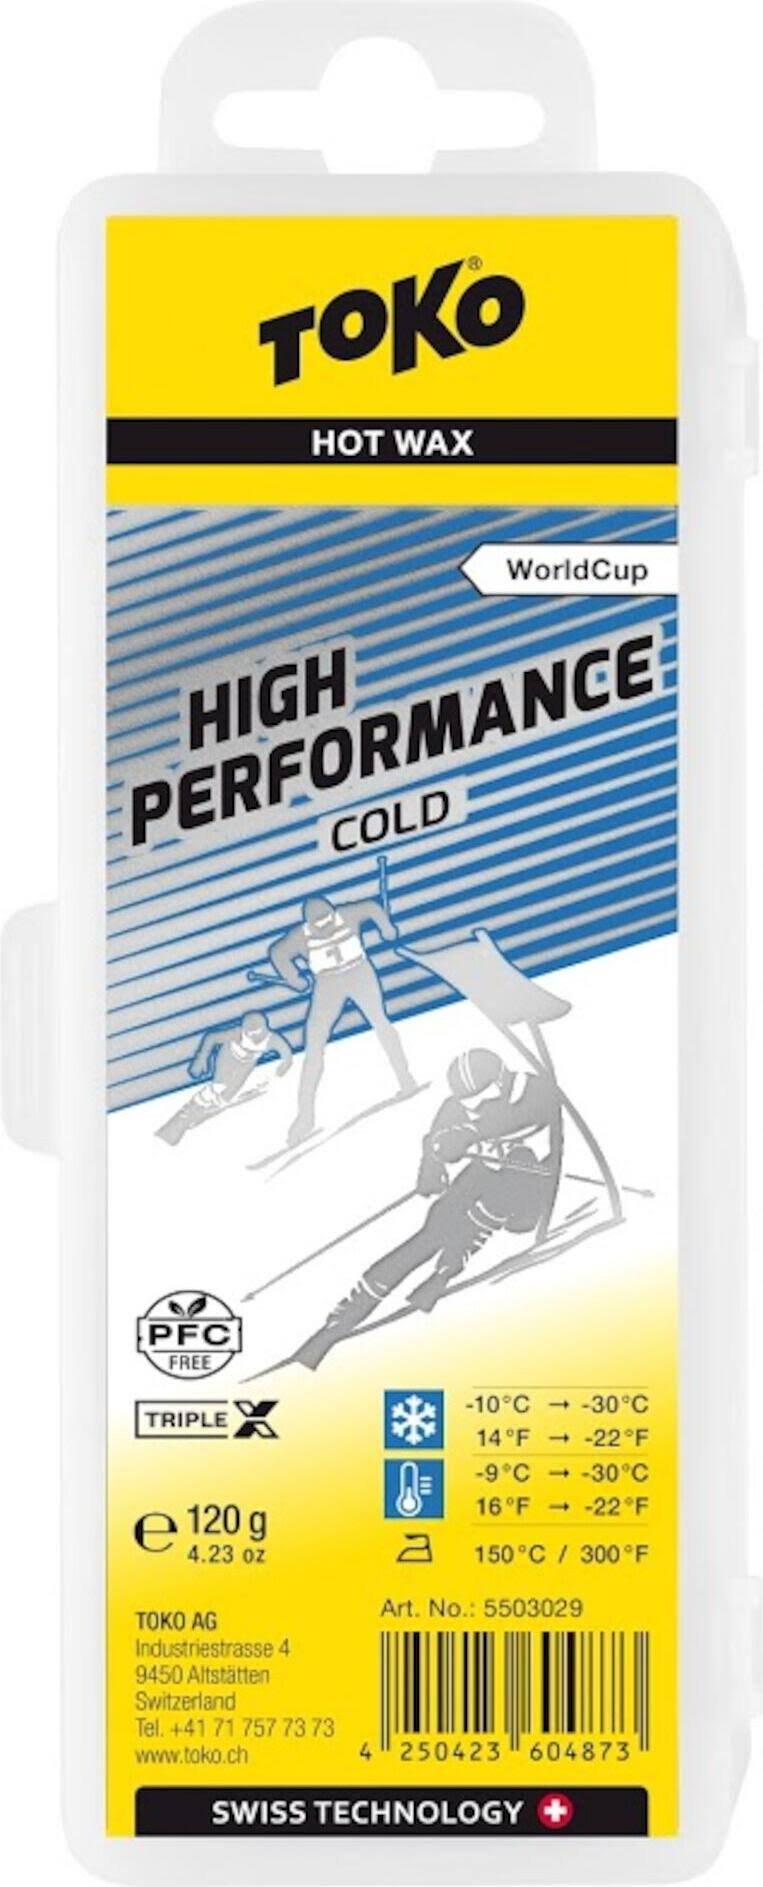 Toko World Cup High Performance cold 120 g